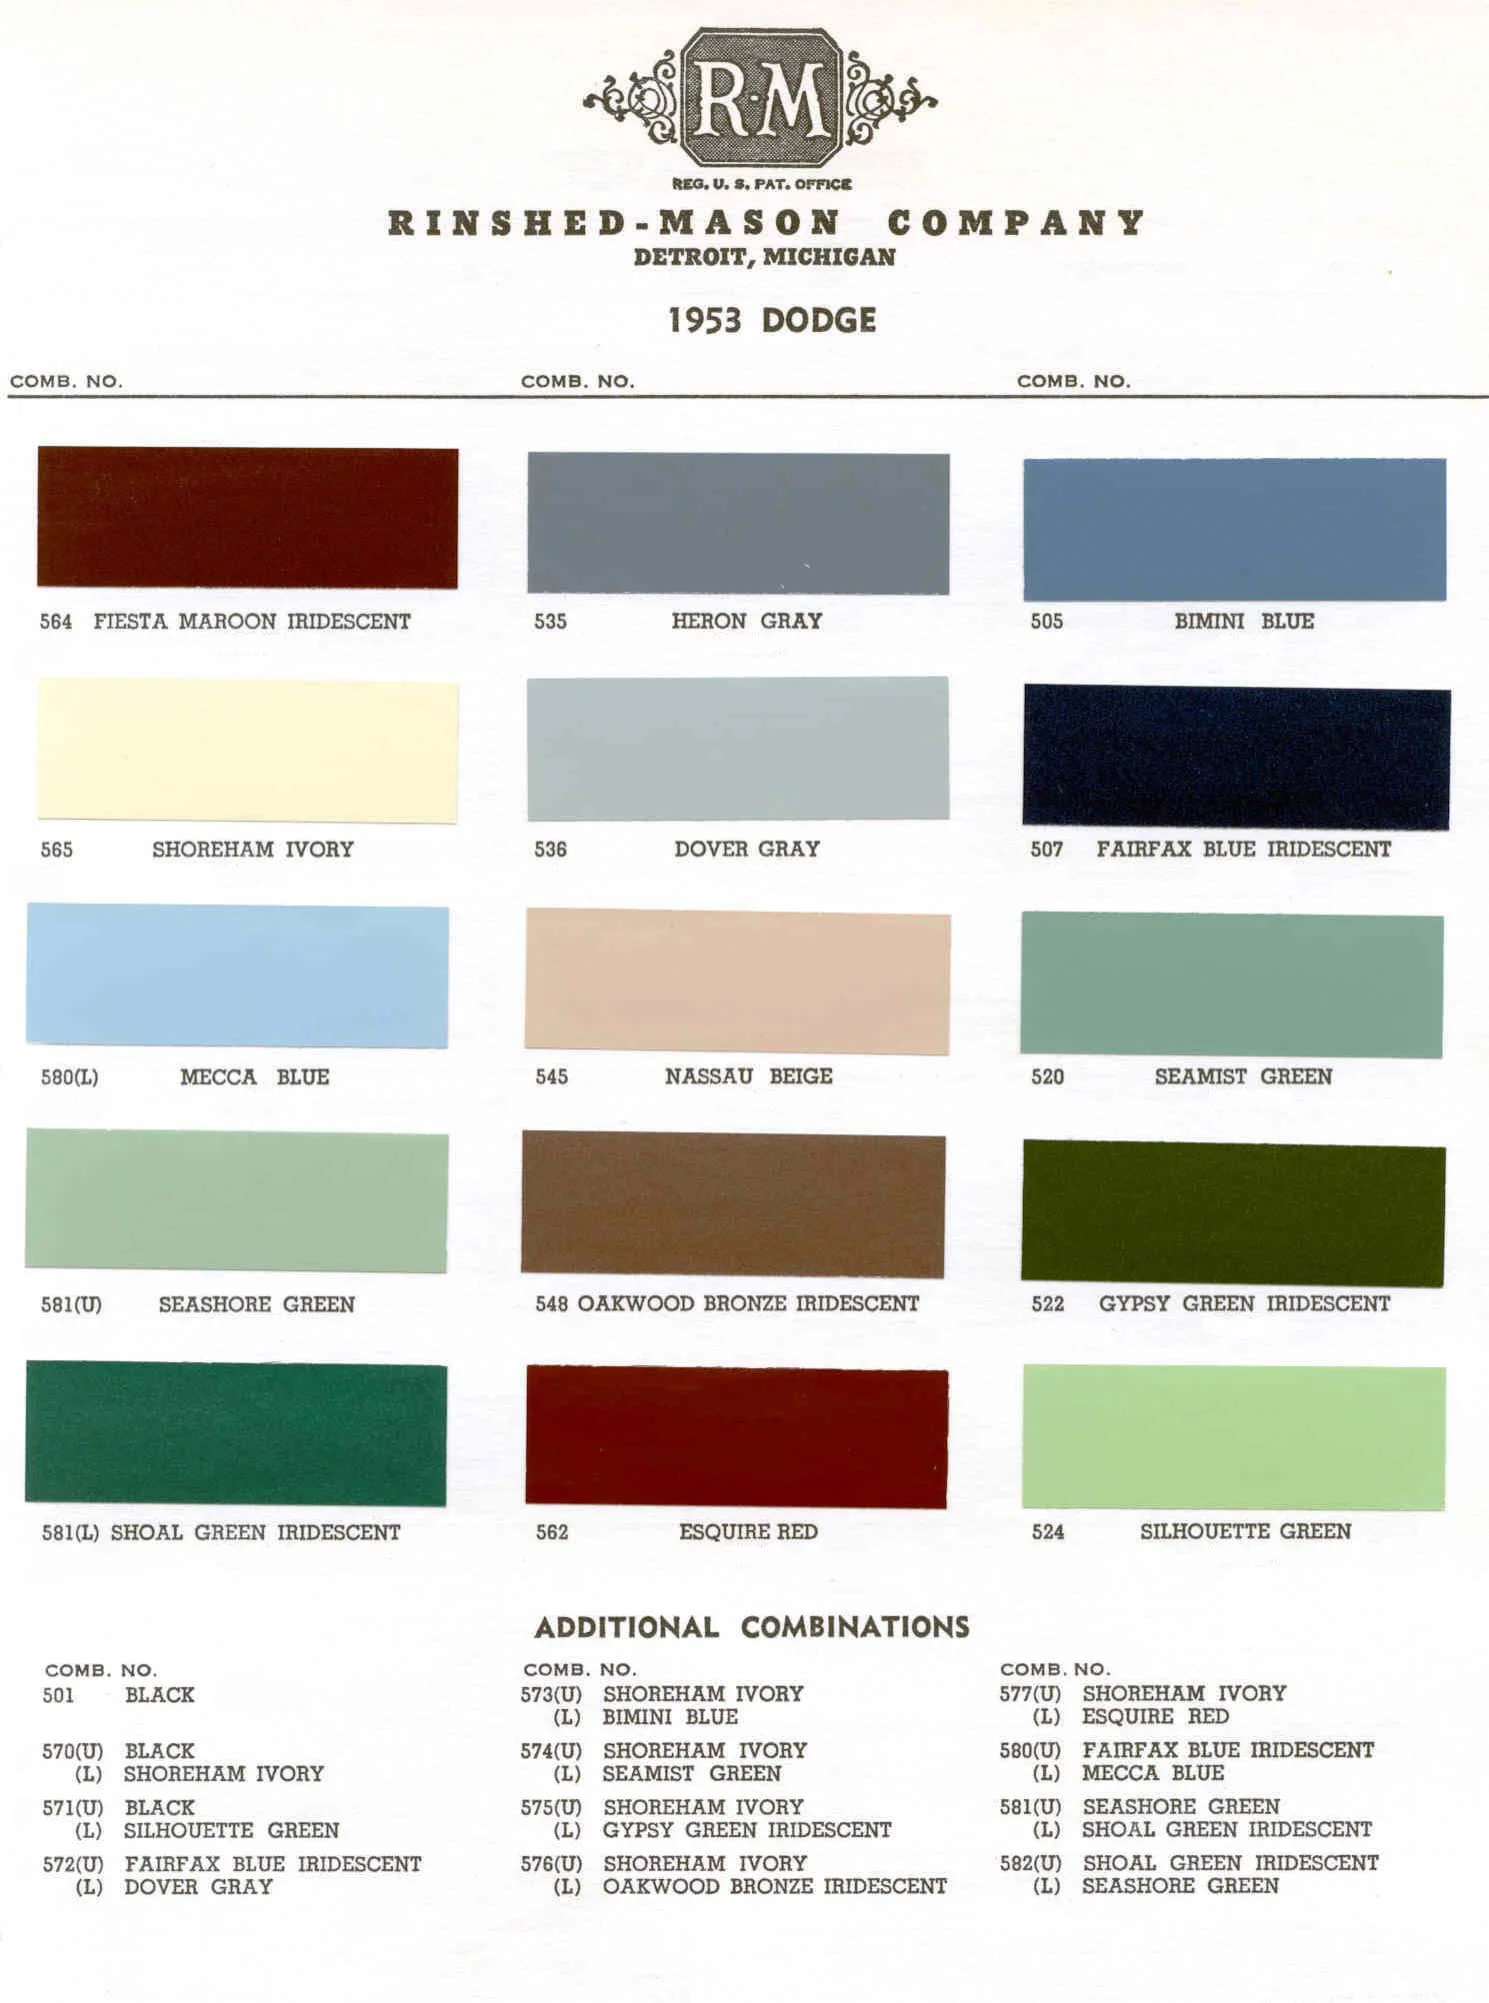 Summary Of Colors used on all Dodge Vehicles in 1953